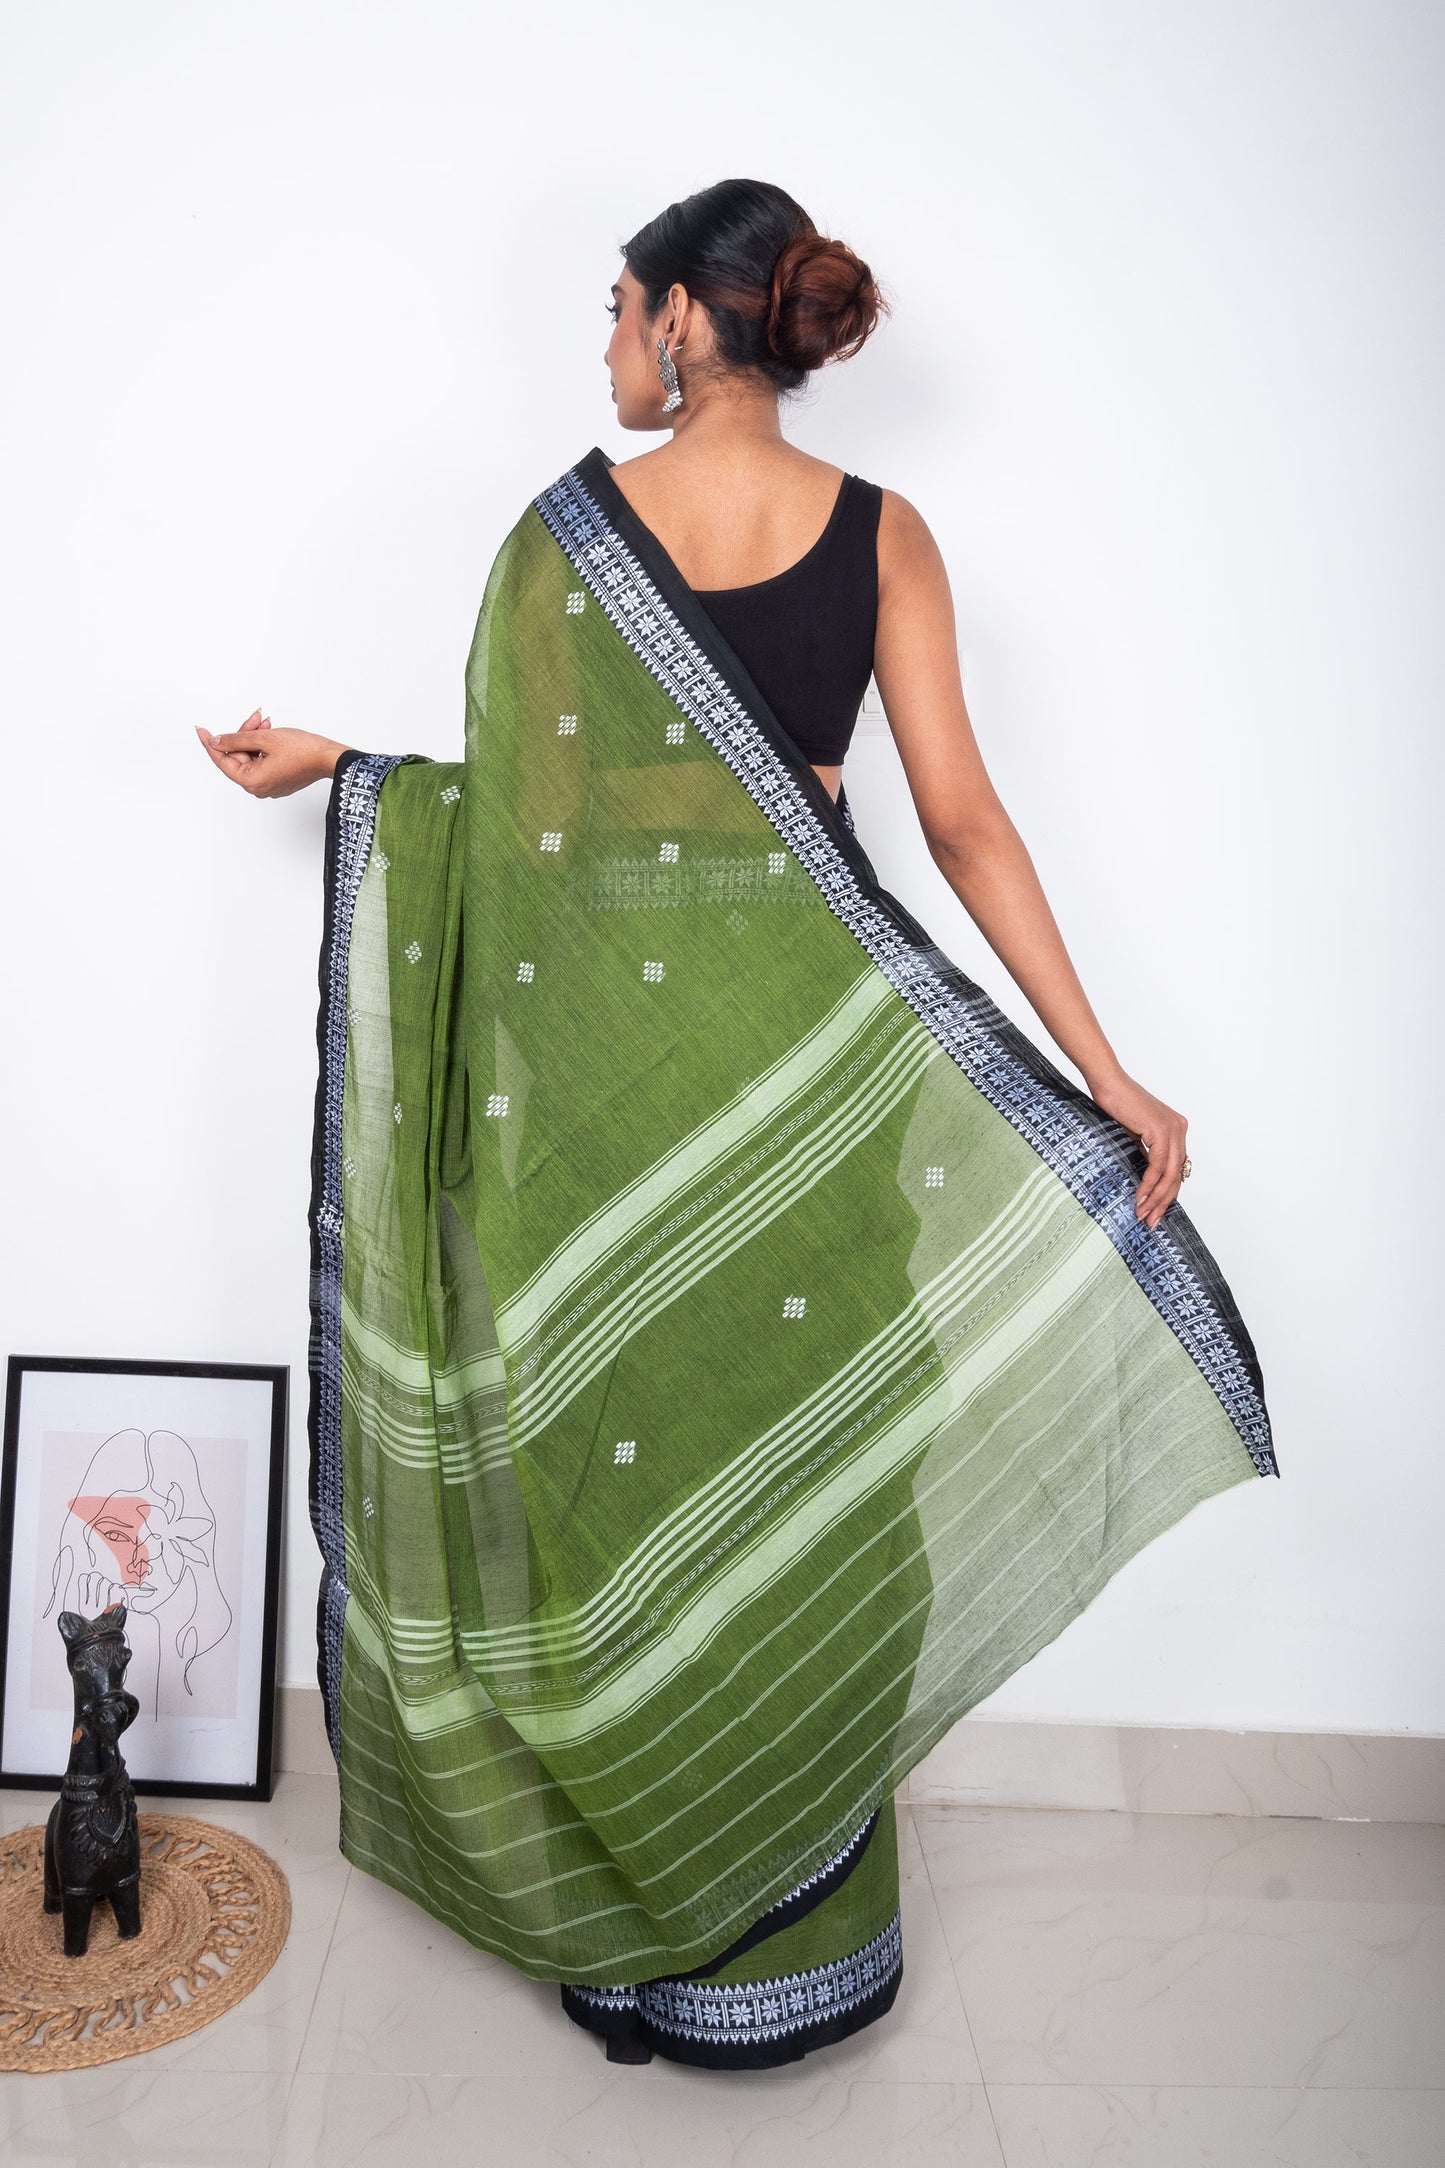 Green Cotton Dhaniakhali Saree with Black Woven Borders